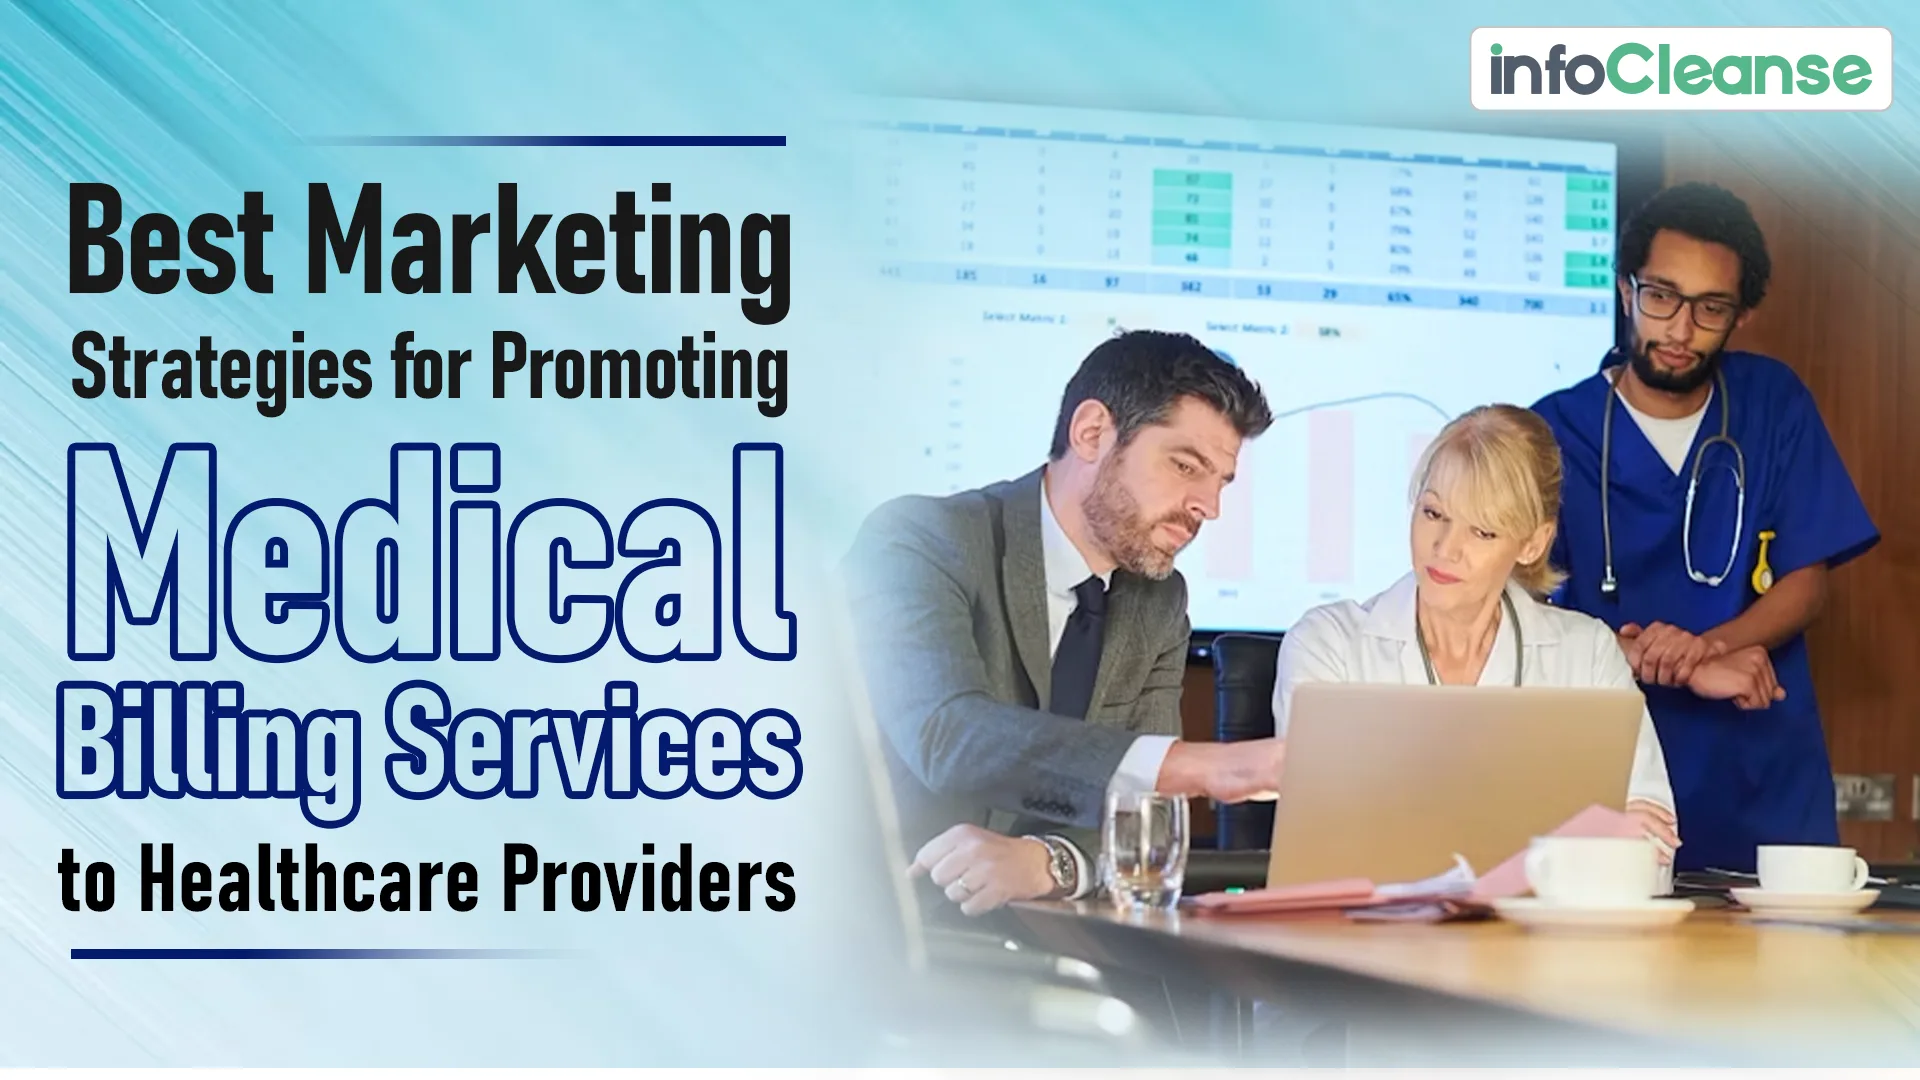 Best Marketing Strategies for Promoting Medical Billing Services to Healthcare Providers